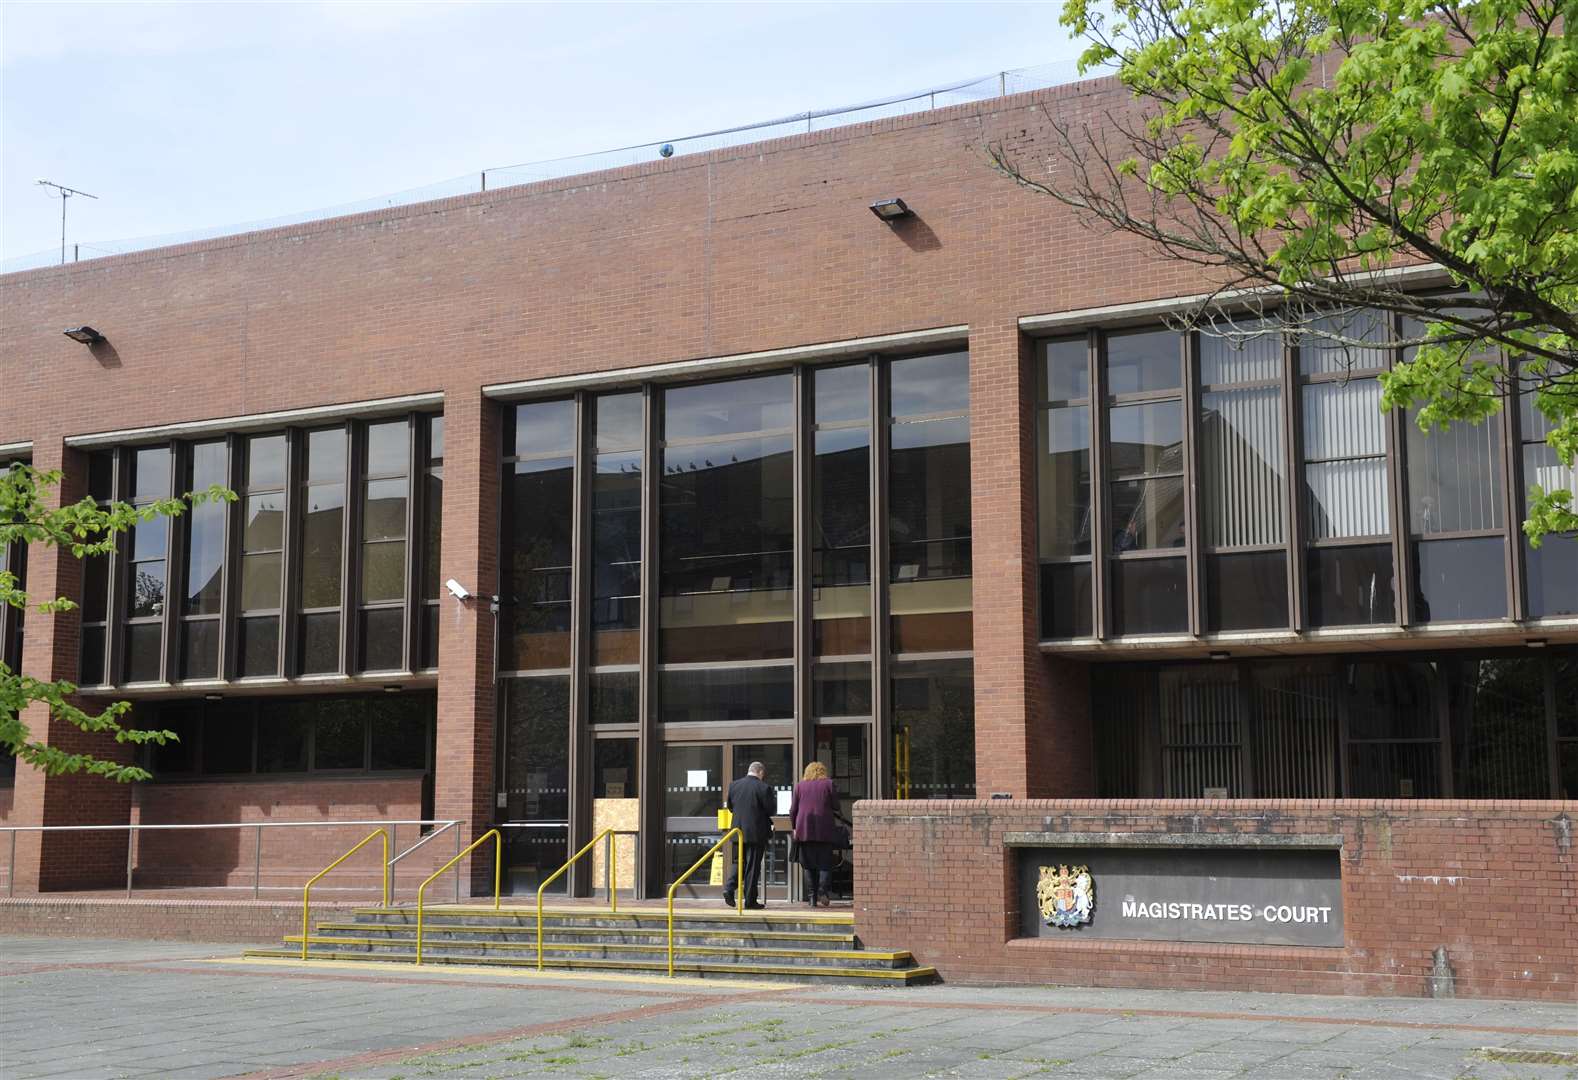 The hearing took place at Folkestone Magistrates' Court